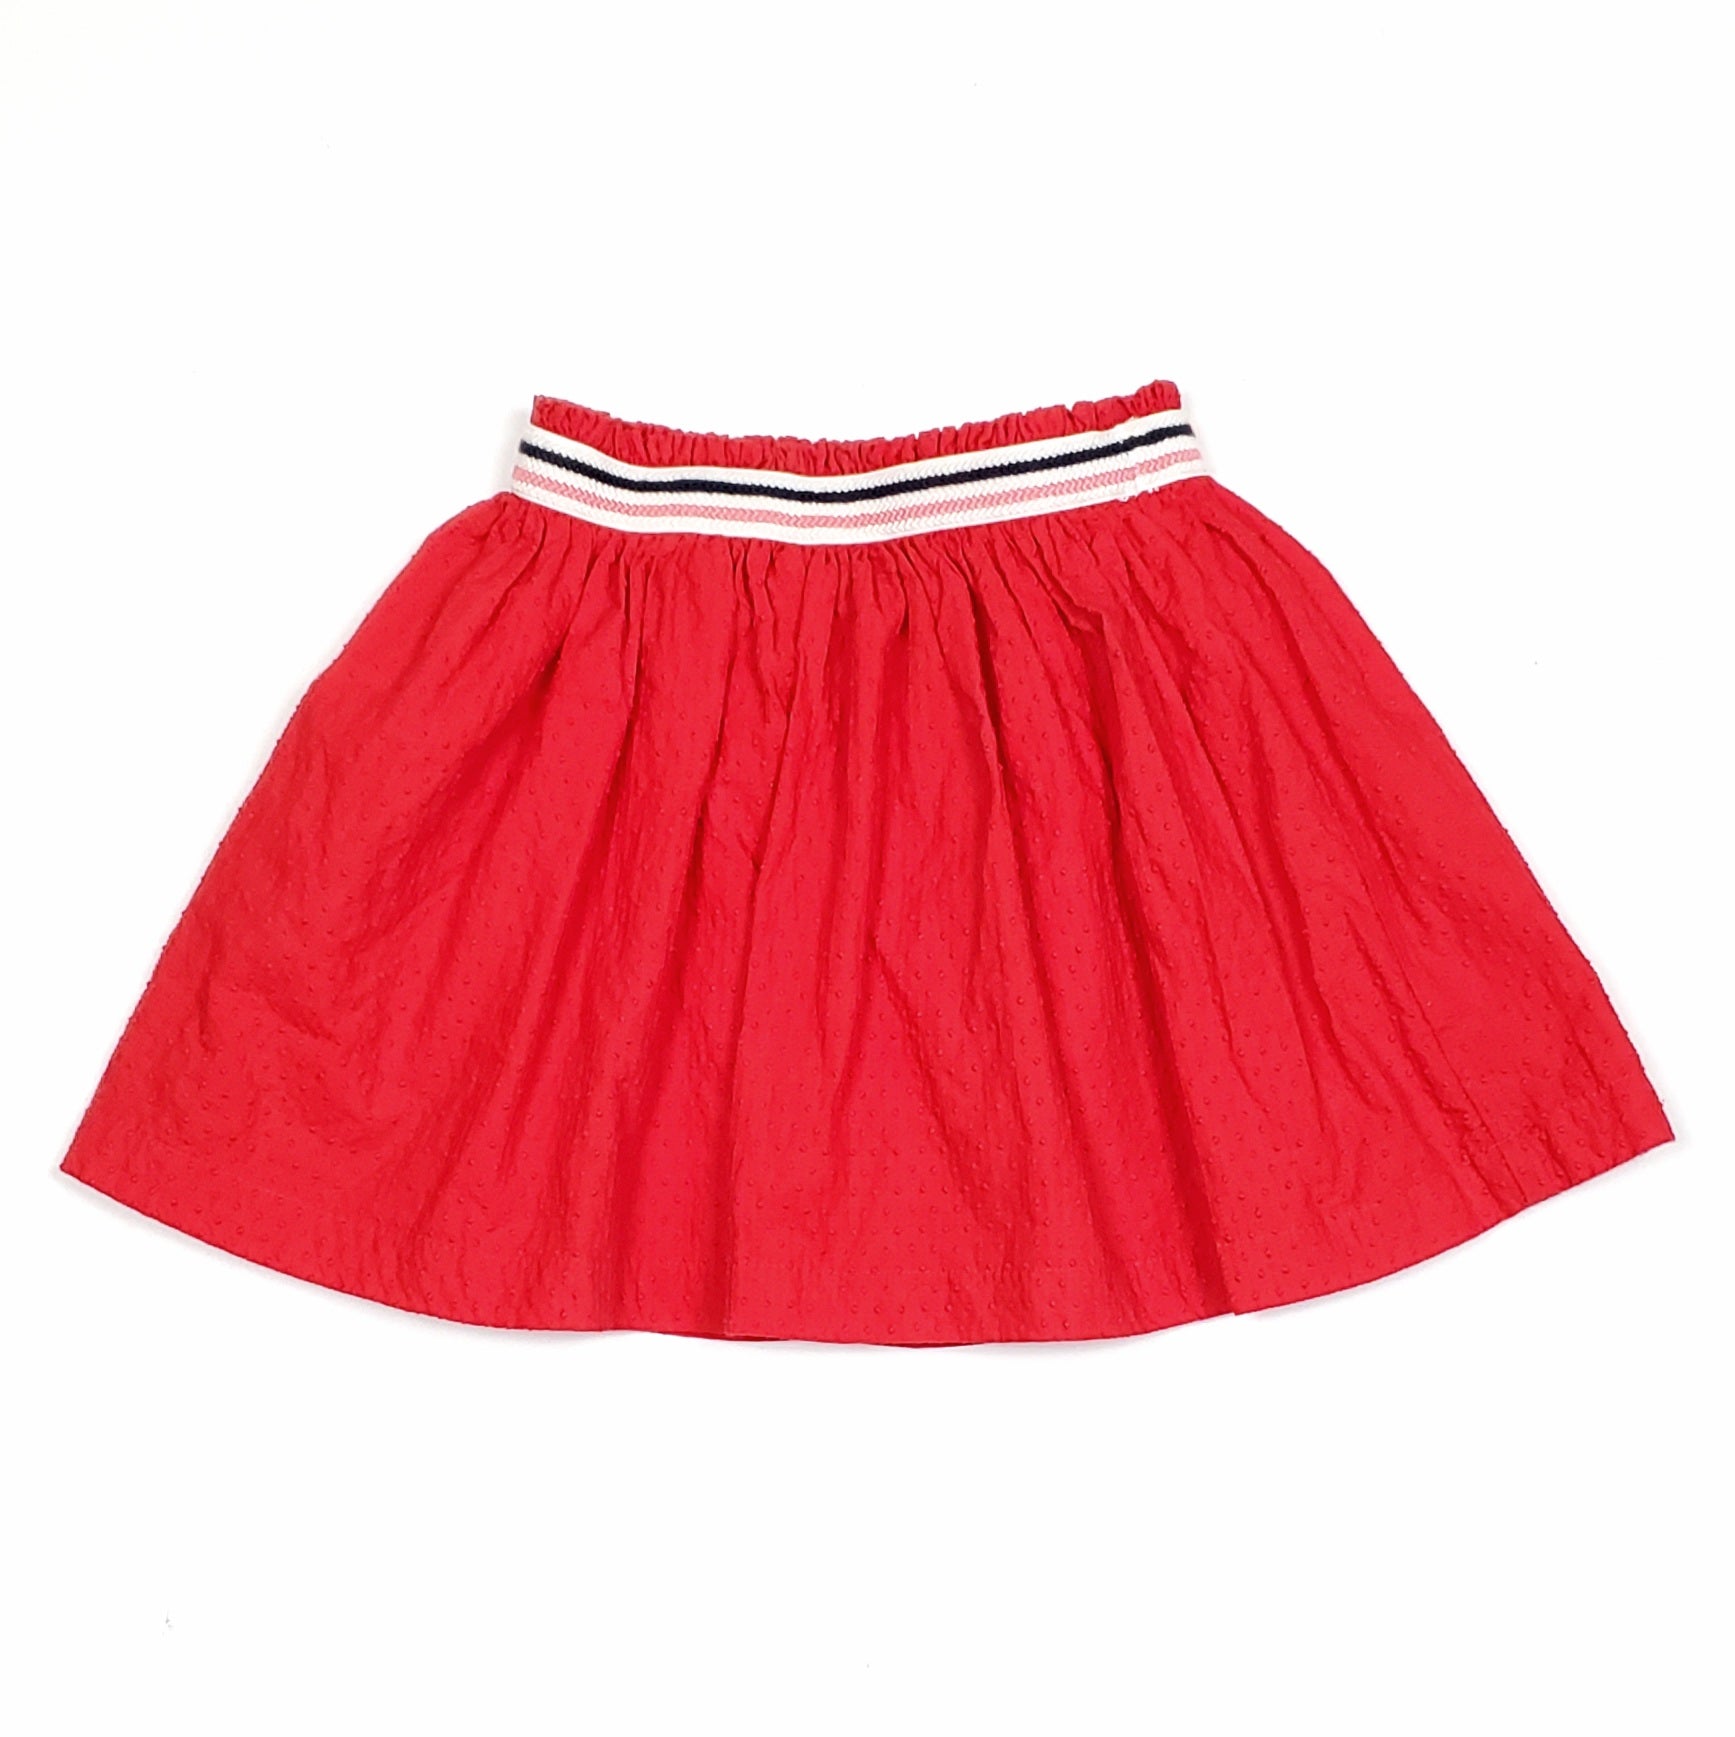 Gymboree Girls Red Textured Skirt Size 5 NWT View 1